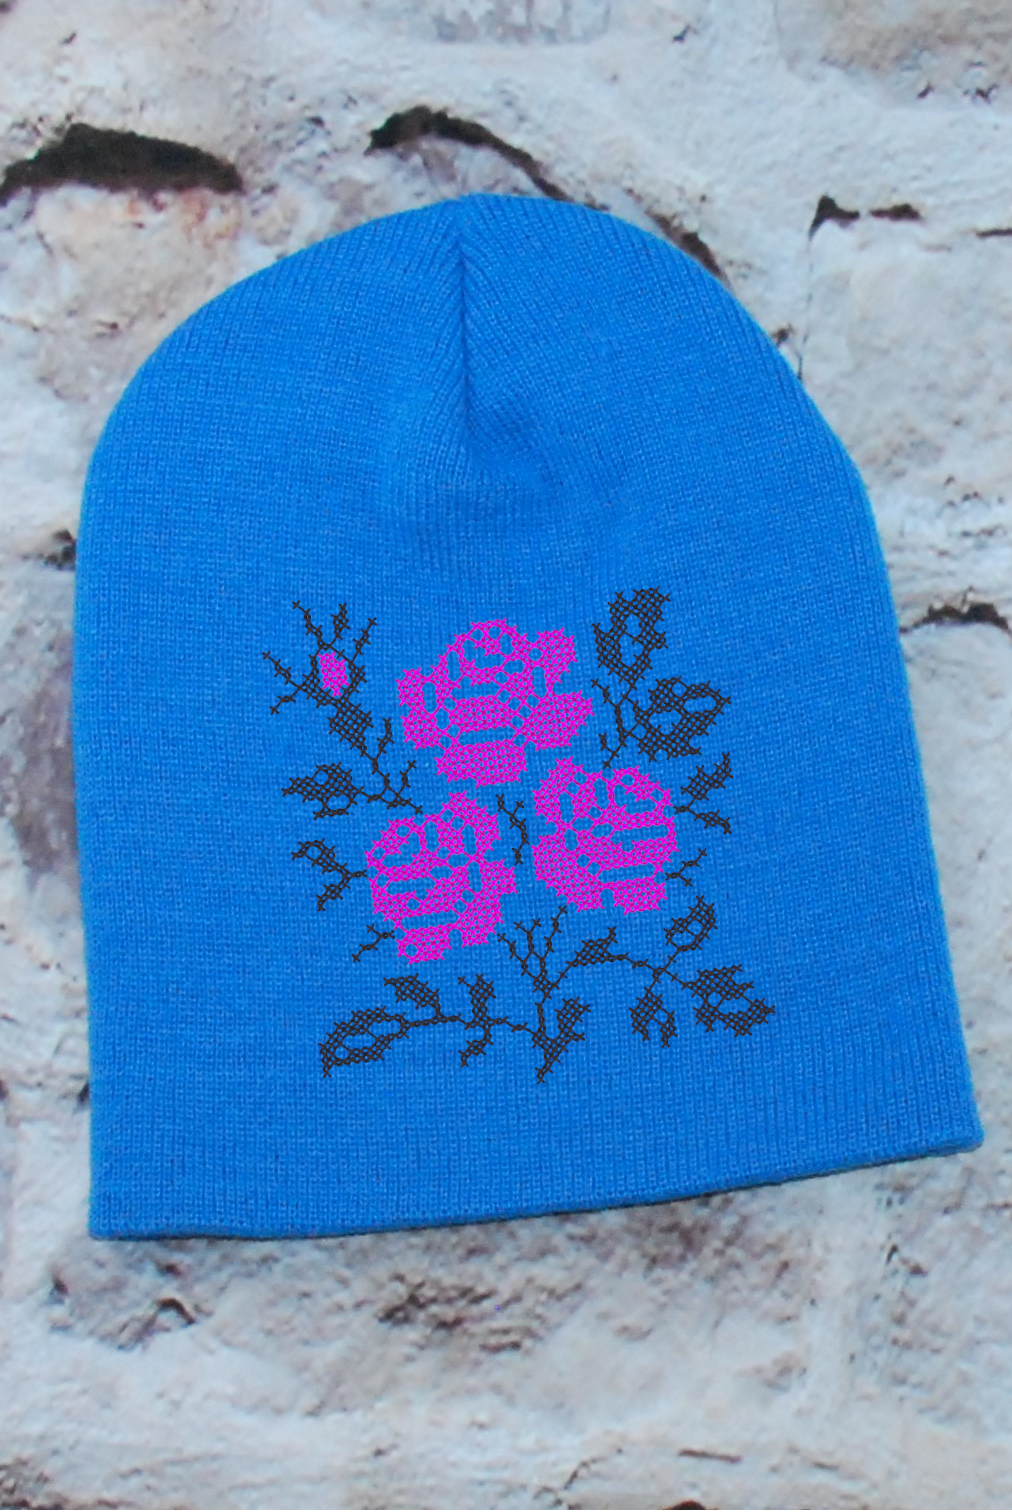 Knitted embroidered beanie hat "Roses" Blue